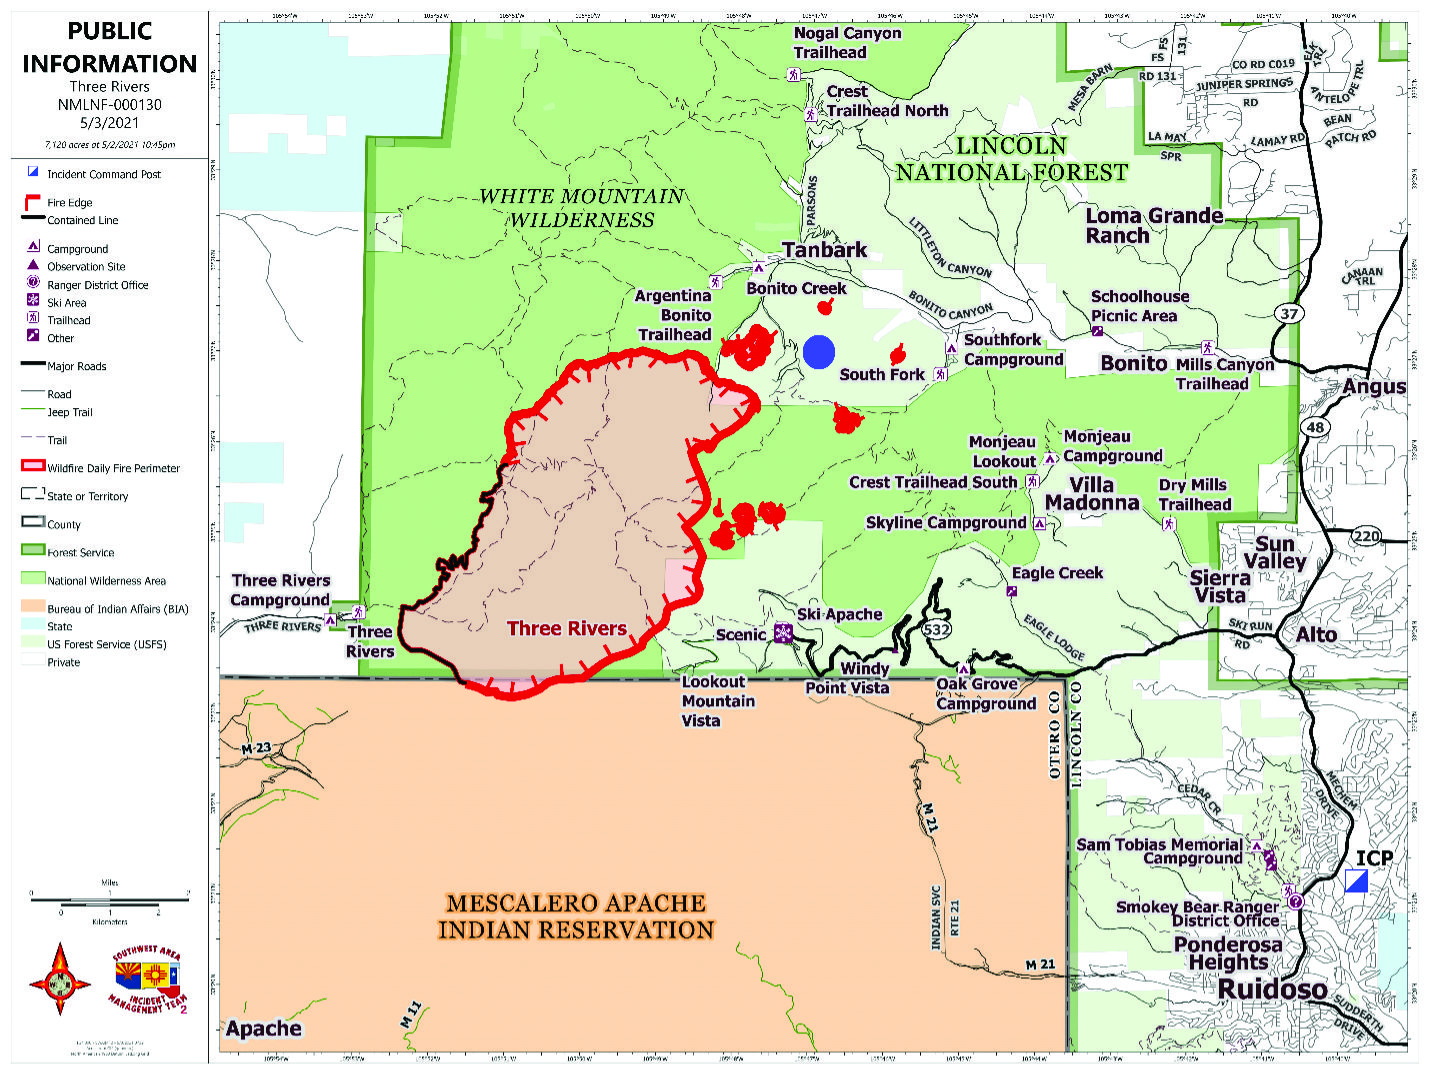 Three Rivers wildfire map from May 3rd, 2021.